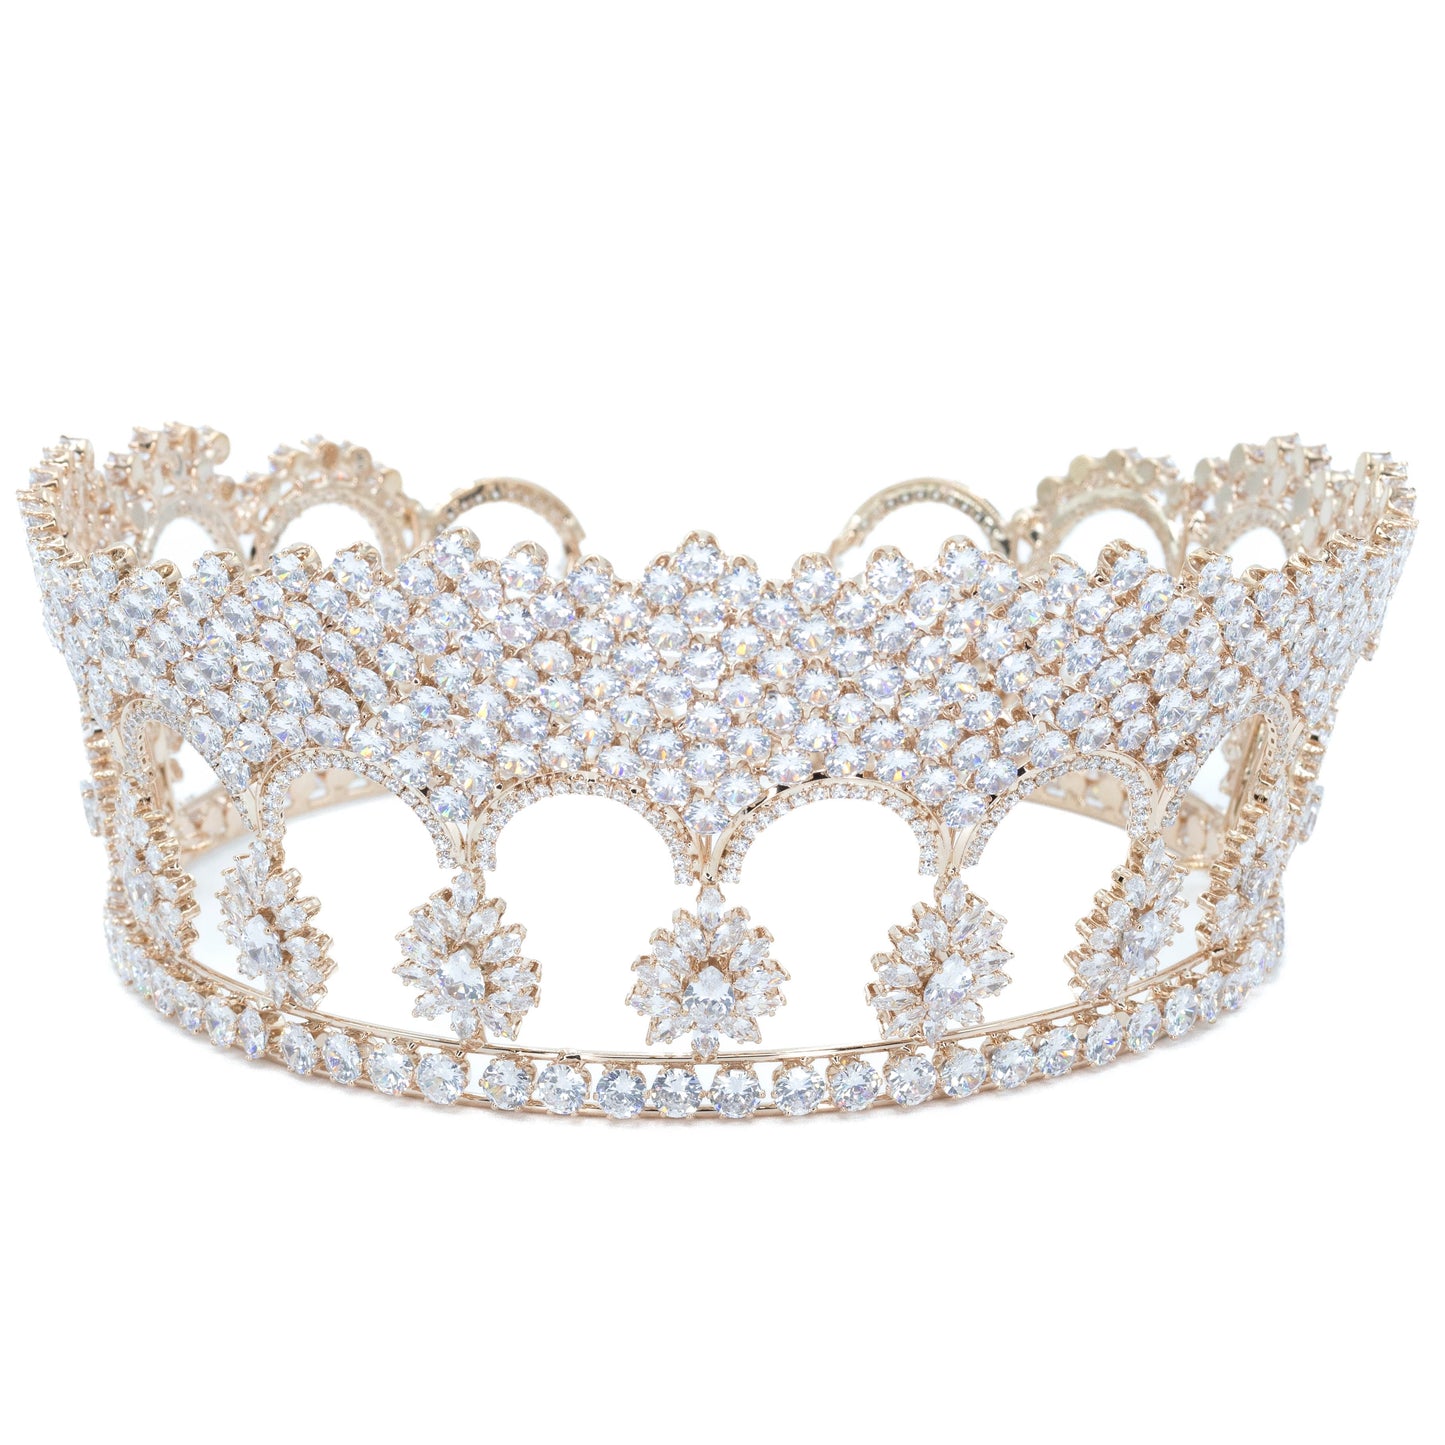 The Halo Crown